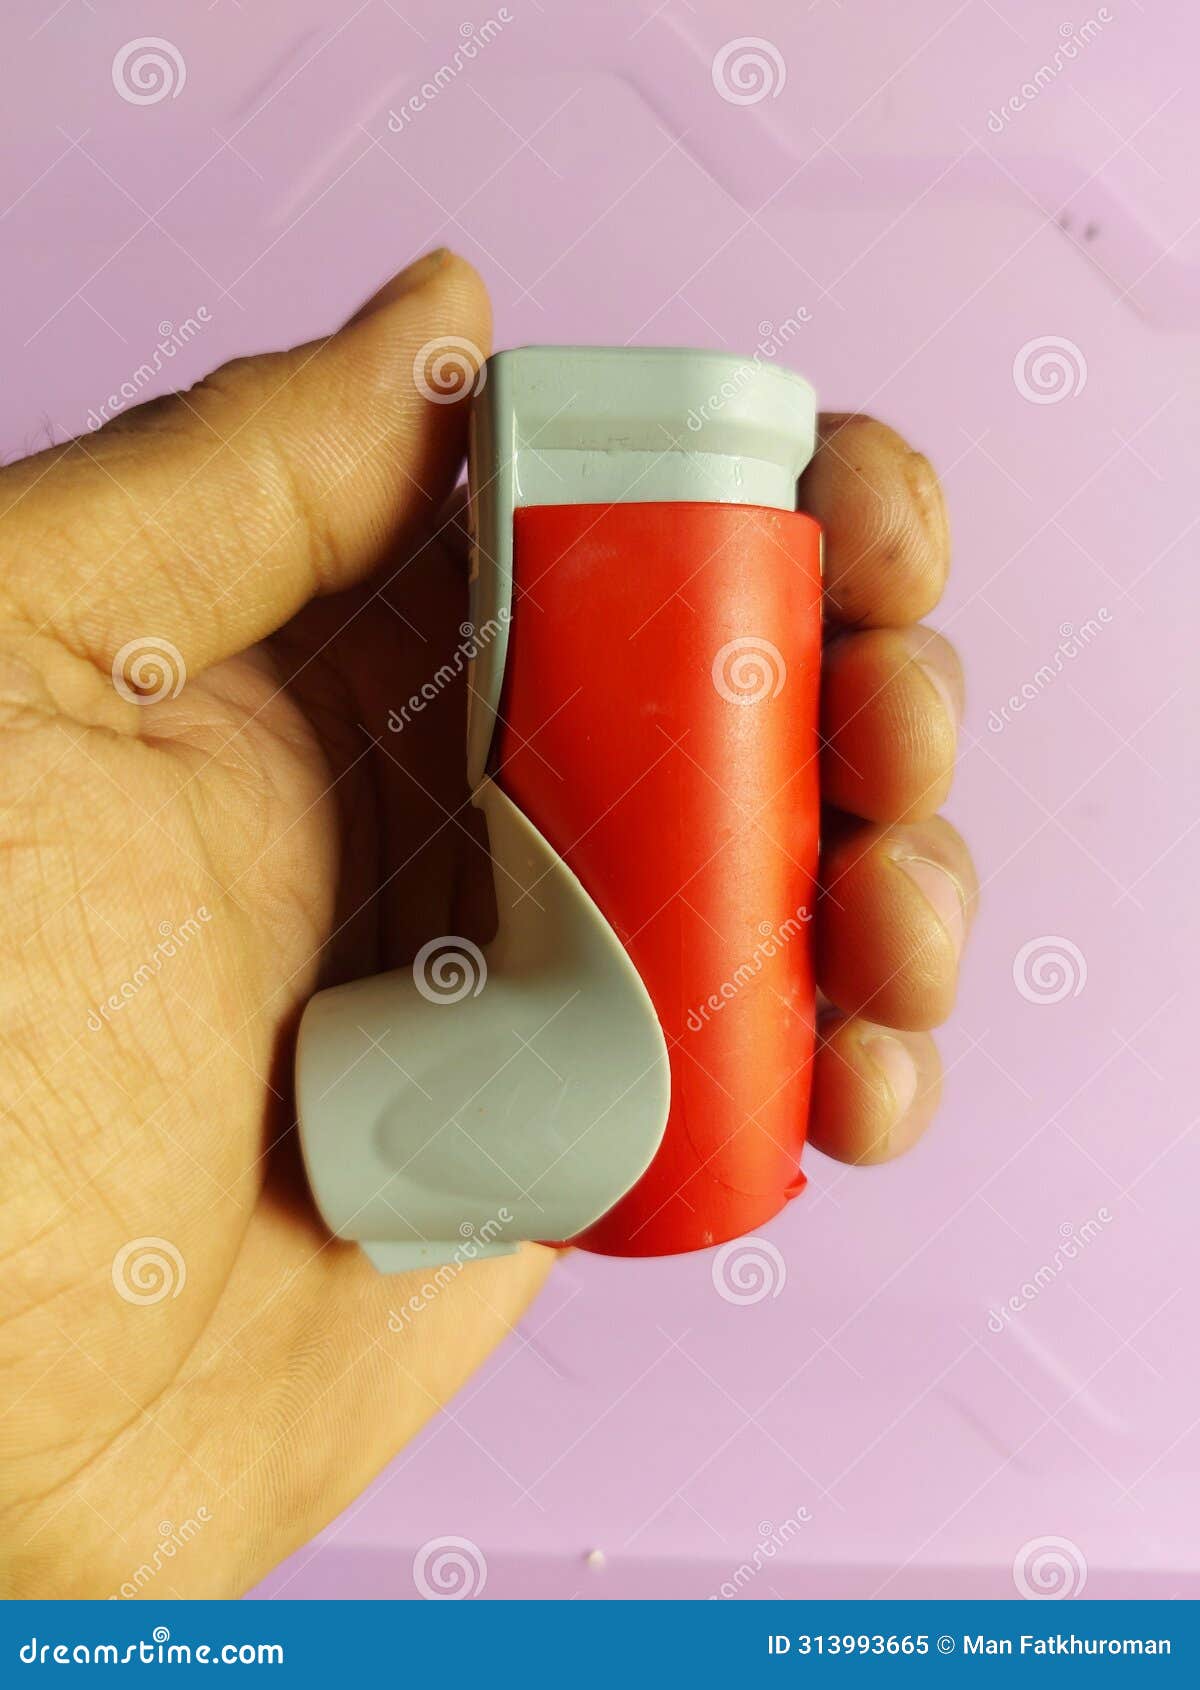 preventative and treatment drug inhaler for asthma sufferers